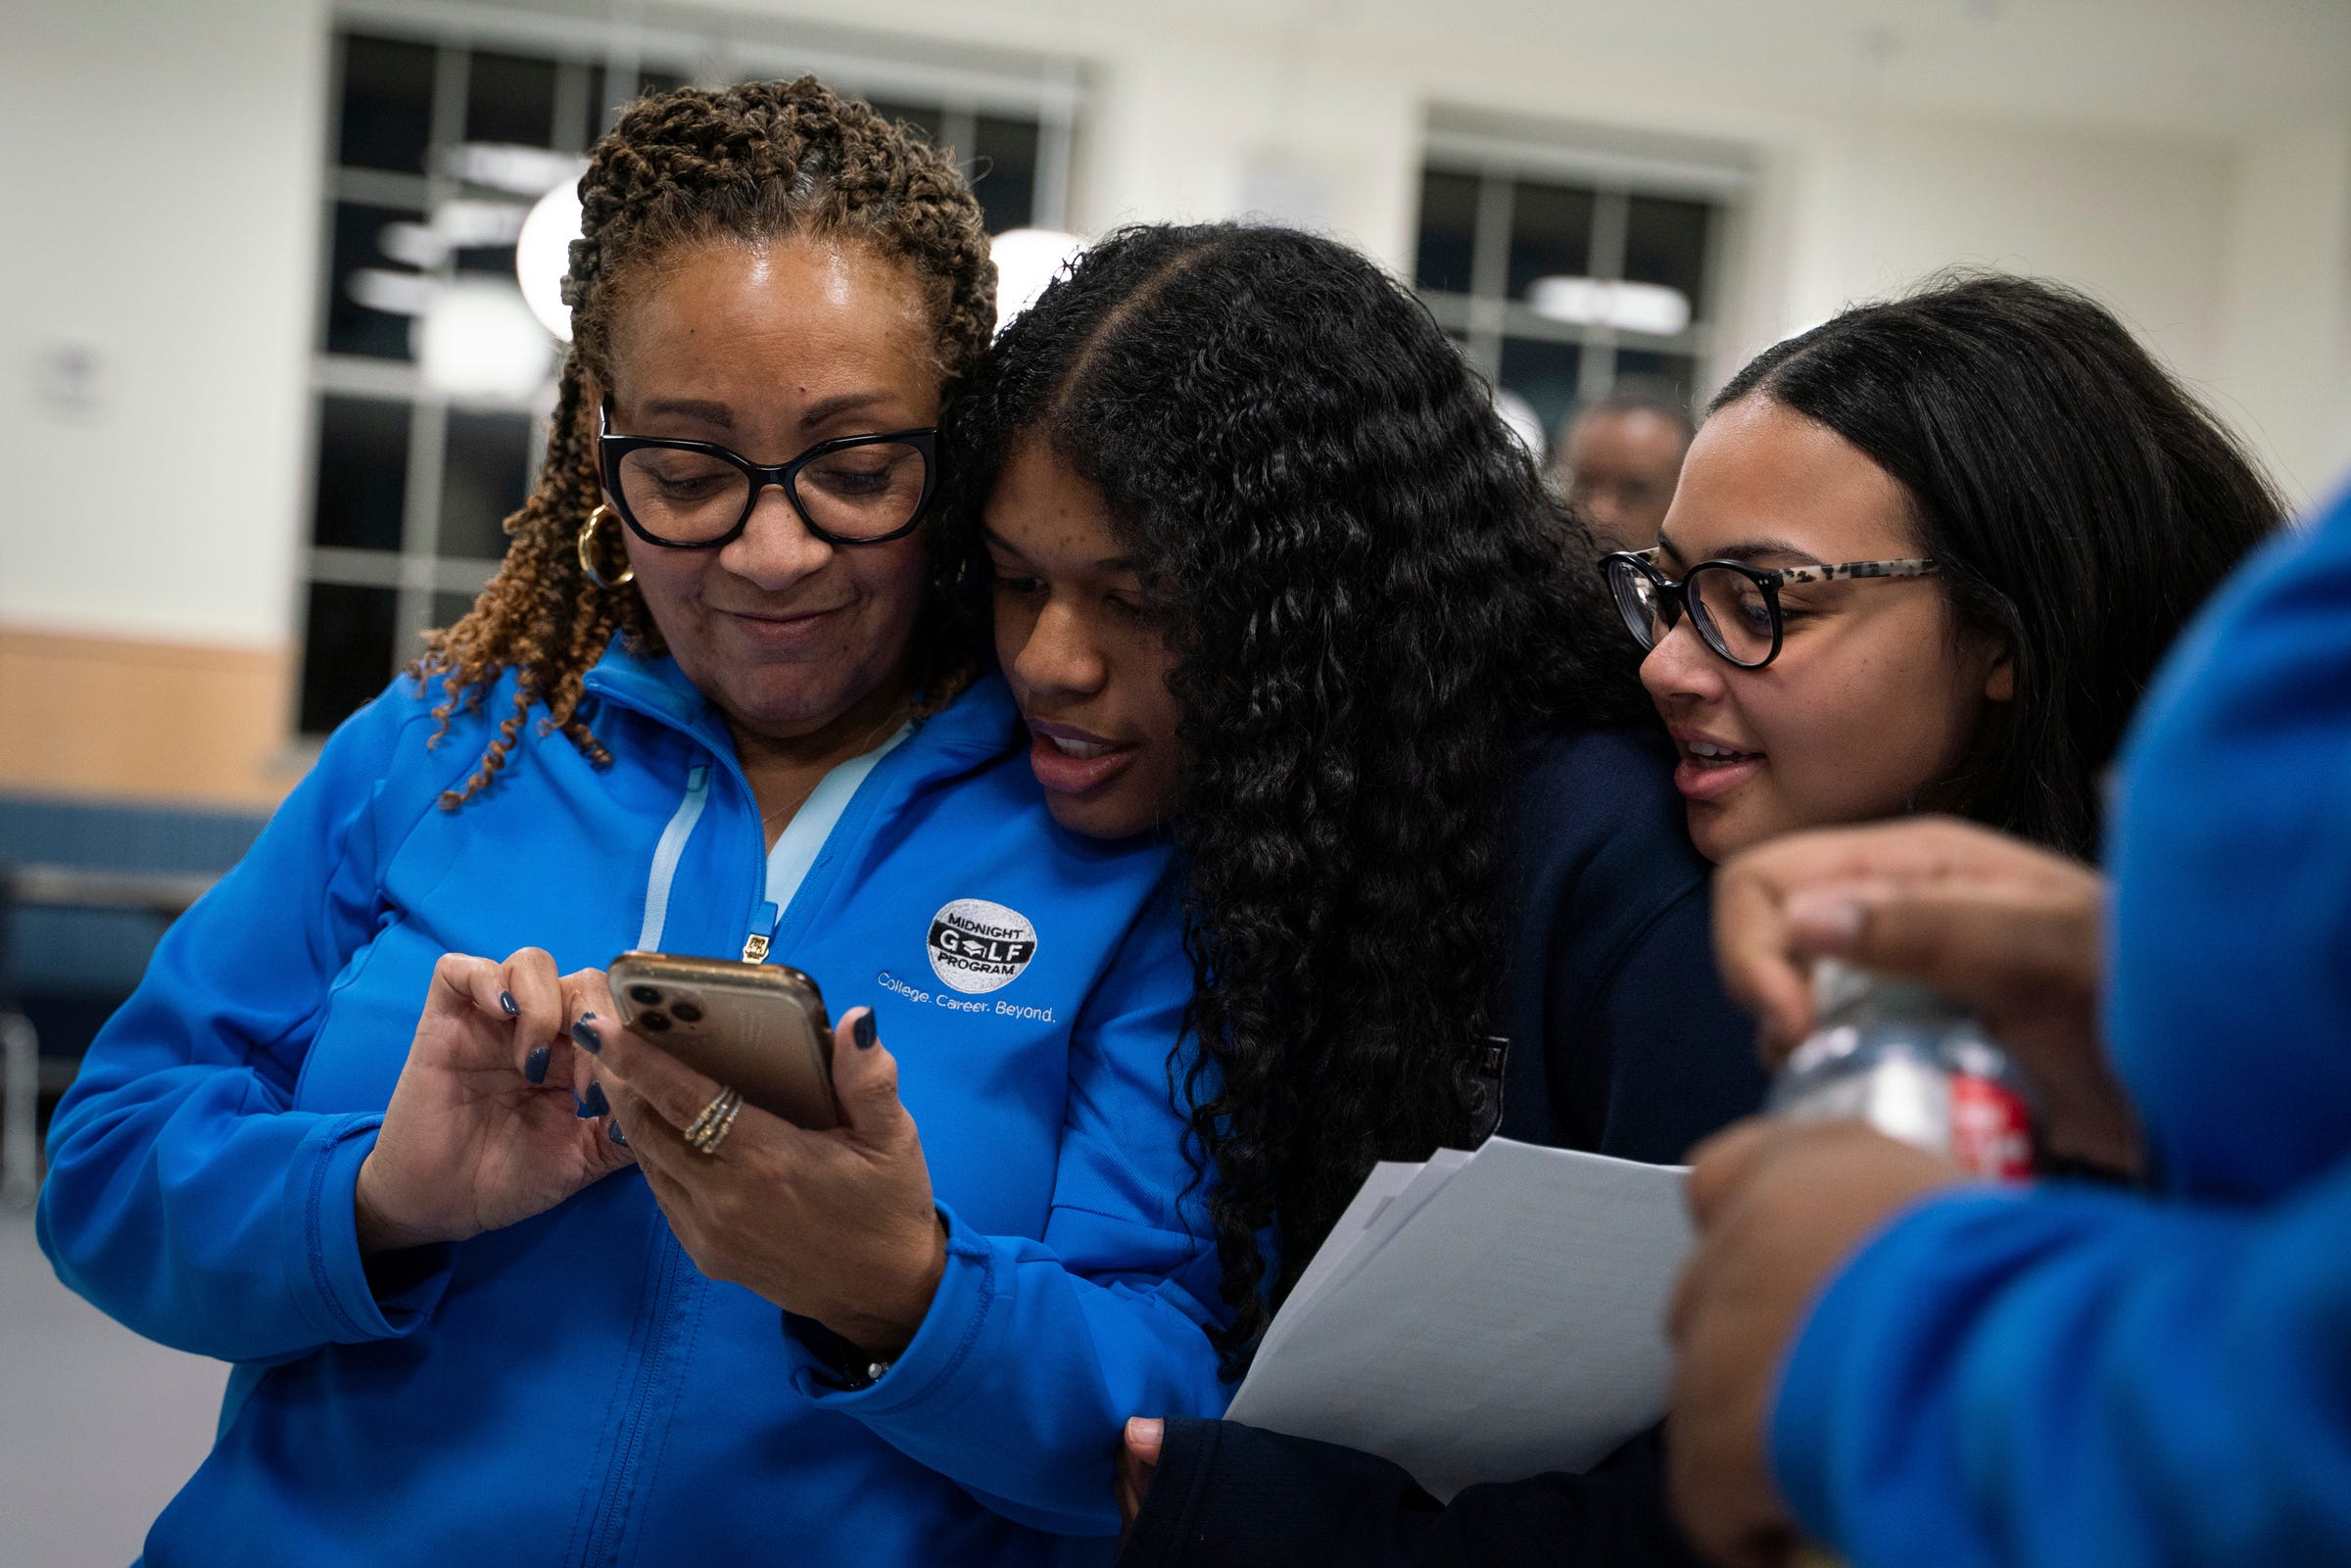 Midnight Golf Founder and President Renee' Fluker, left, talks with Cassidy Dickerson, 17, of Detroit, and Alexa Thomas, 17, of Franklin, during the Midnight Golf Program at Marygrove Conservancy in northwest Detroit, Tuesday, Feb. 7, 2023.